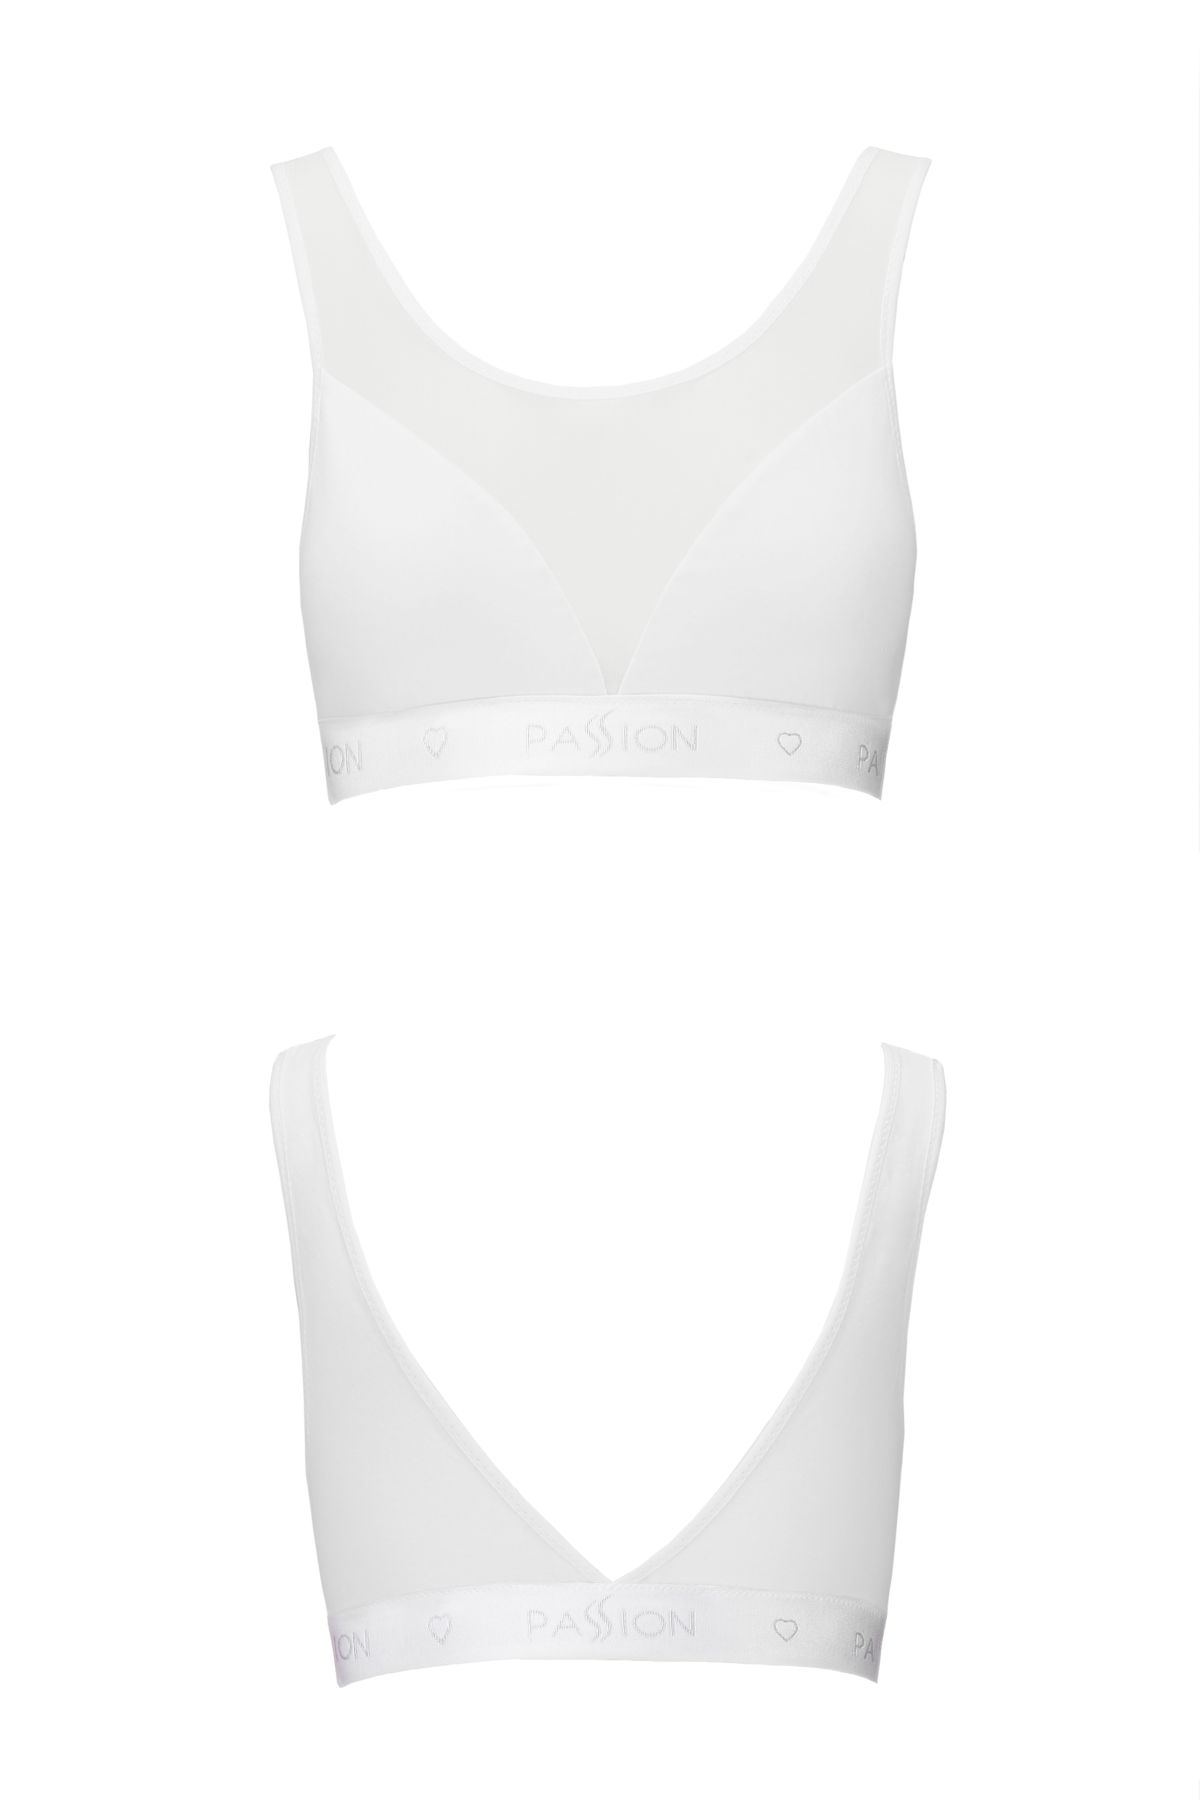     Passion PS002 TOP white